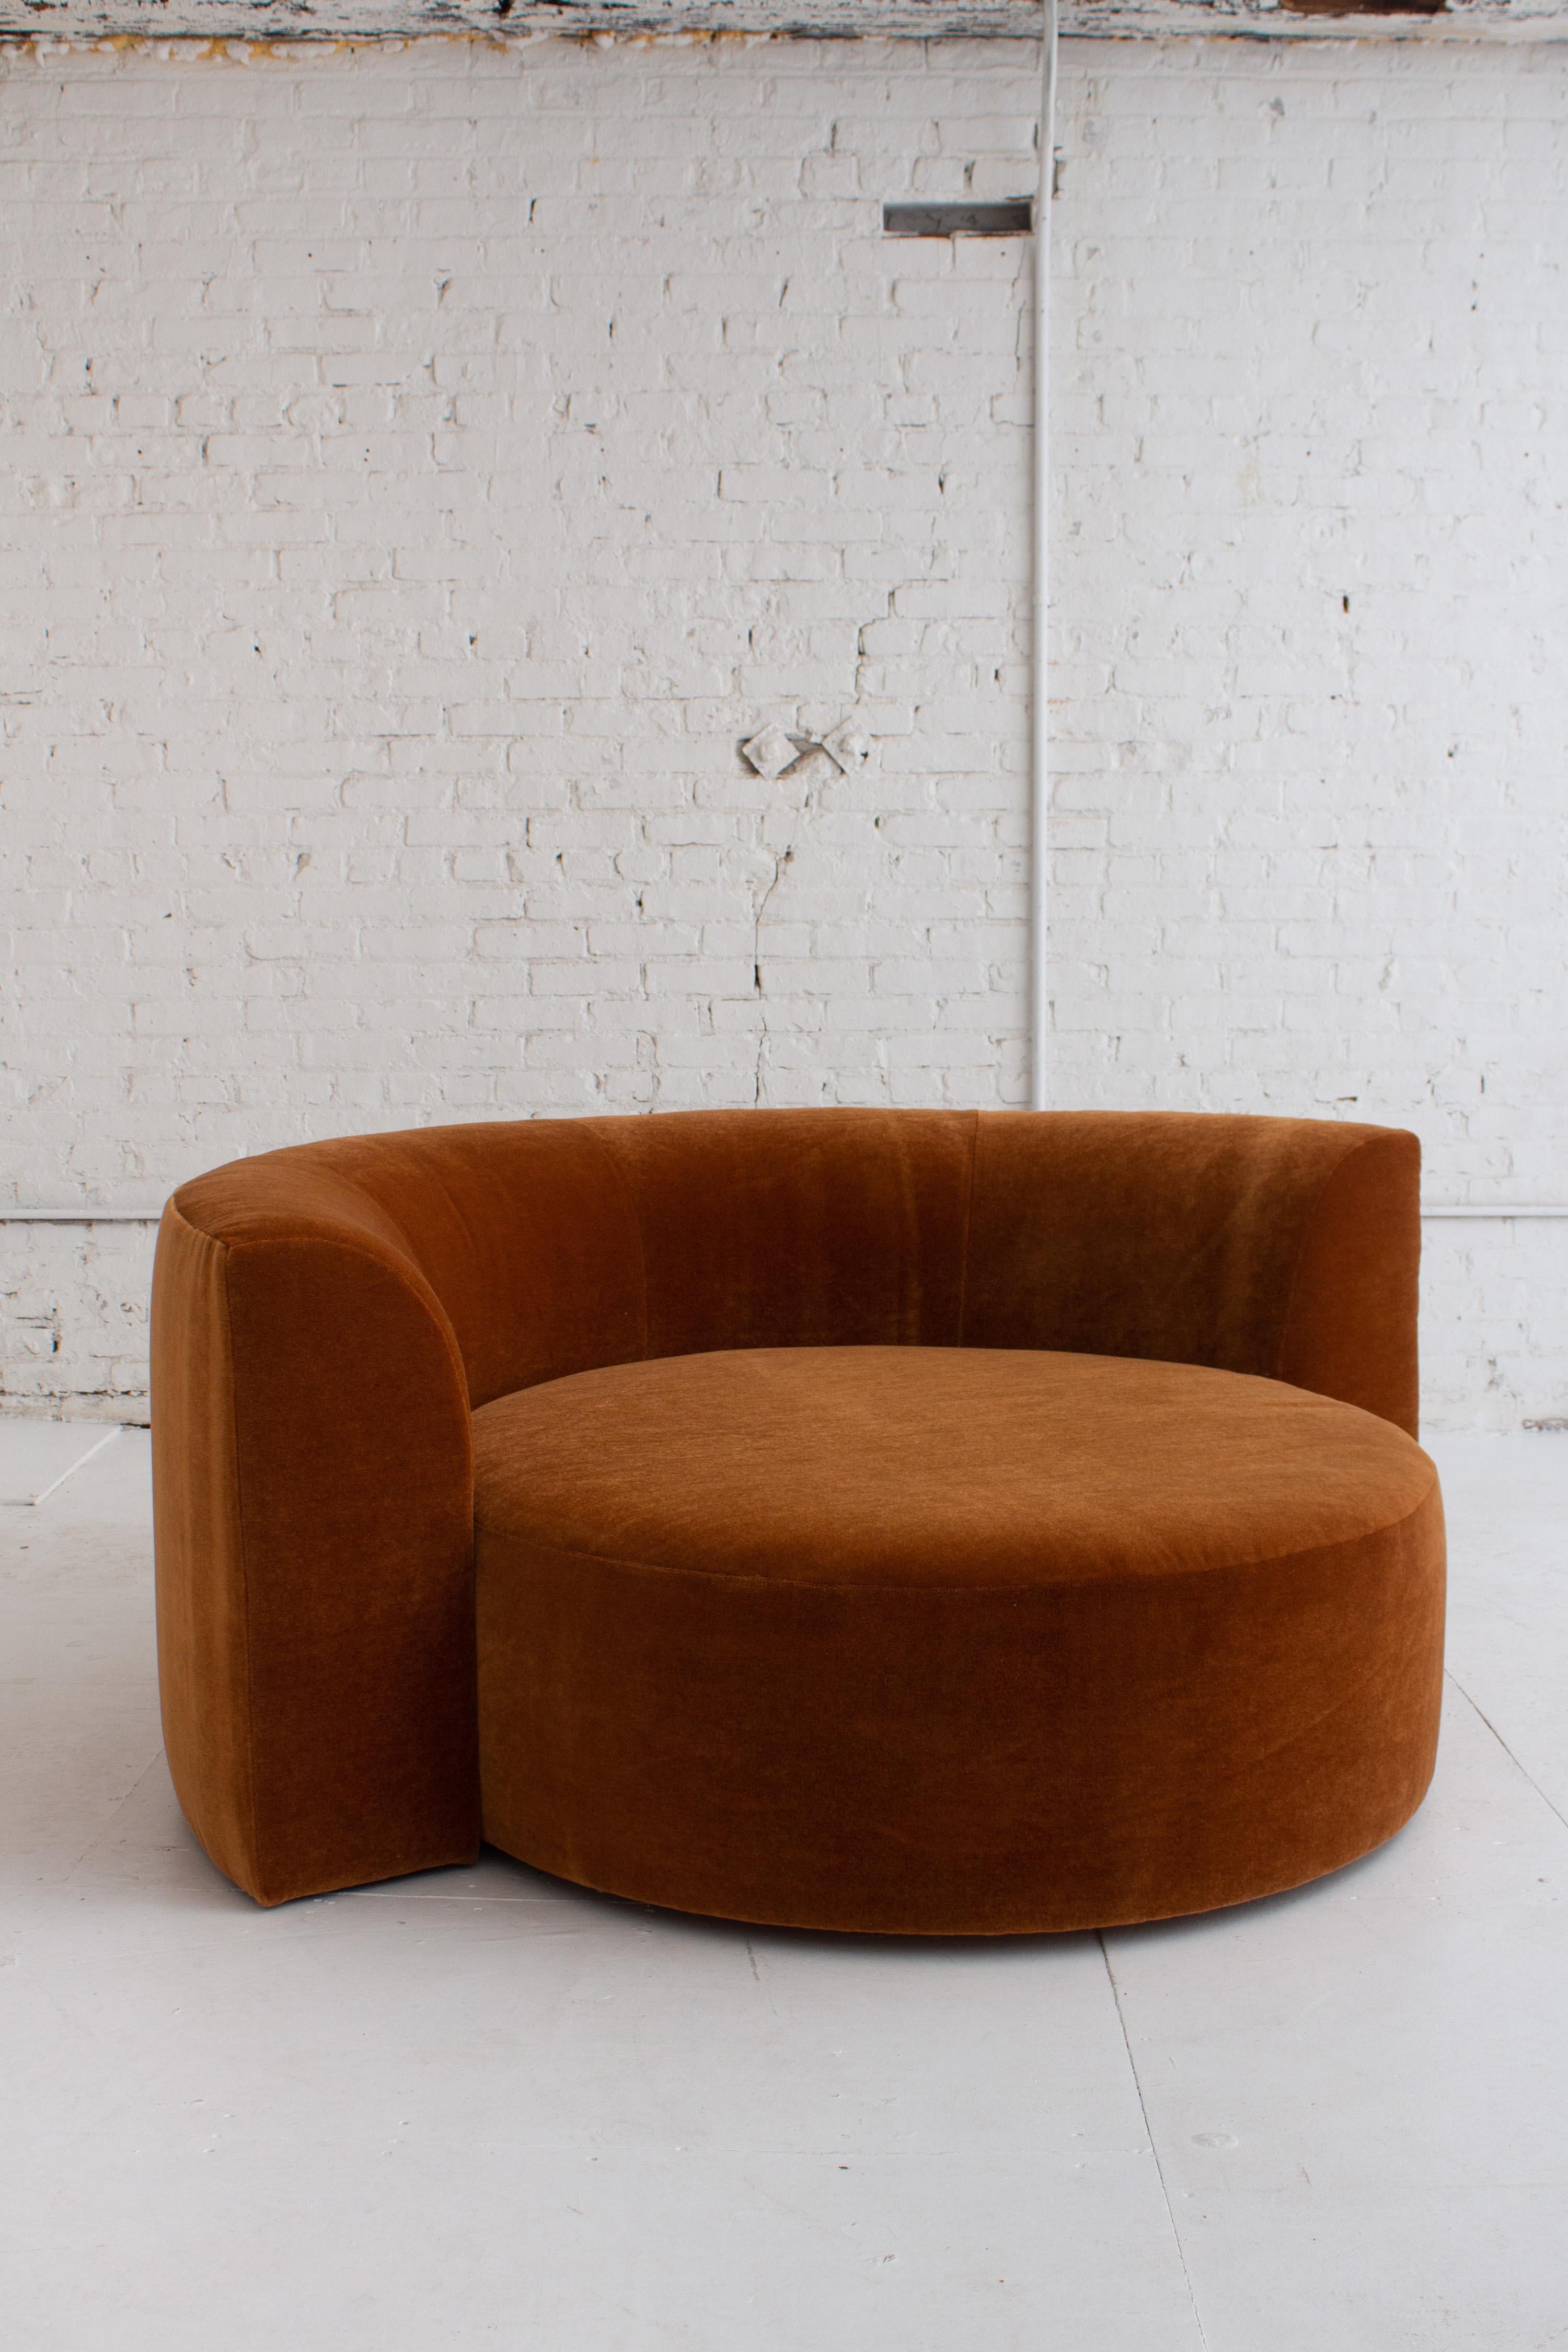 20th Century Circular Chaise Lounge in Mohair by Roger Rougier For Sale